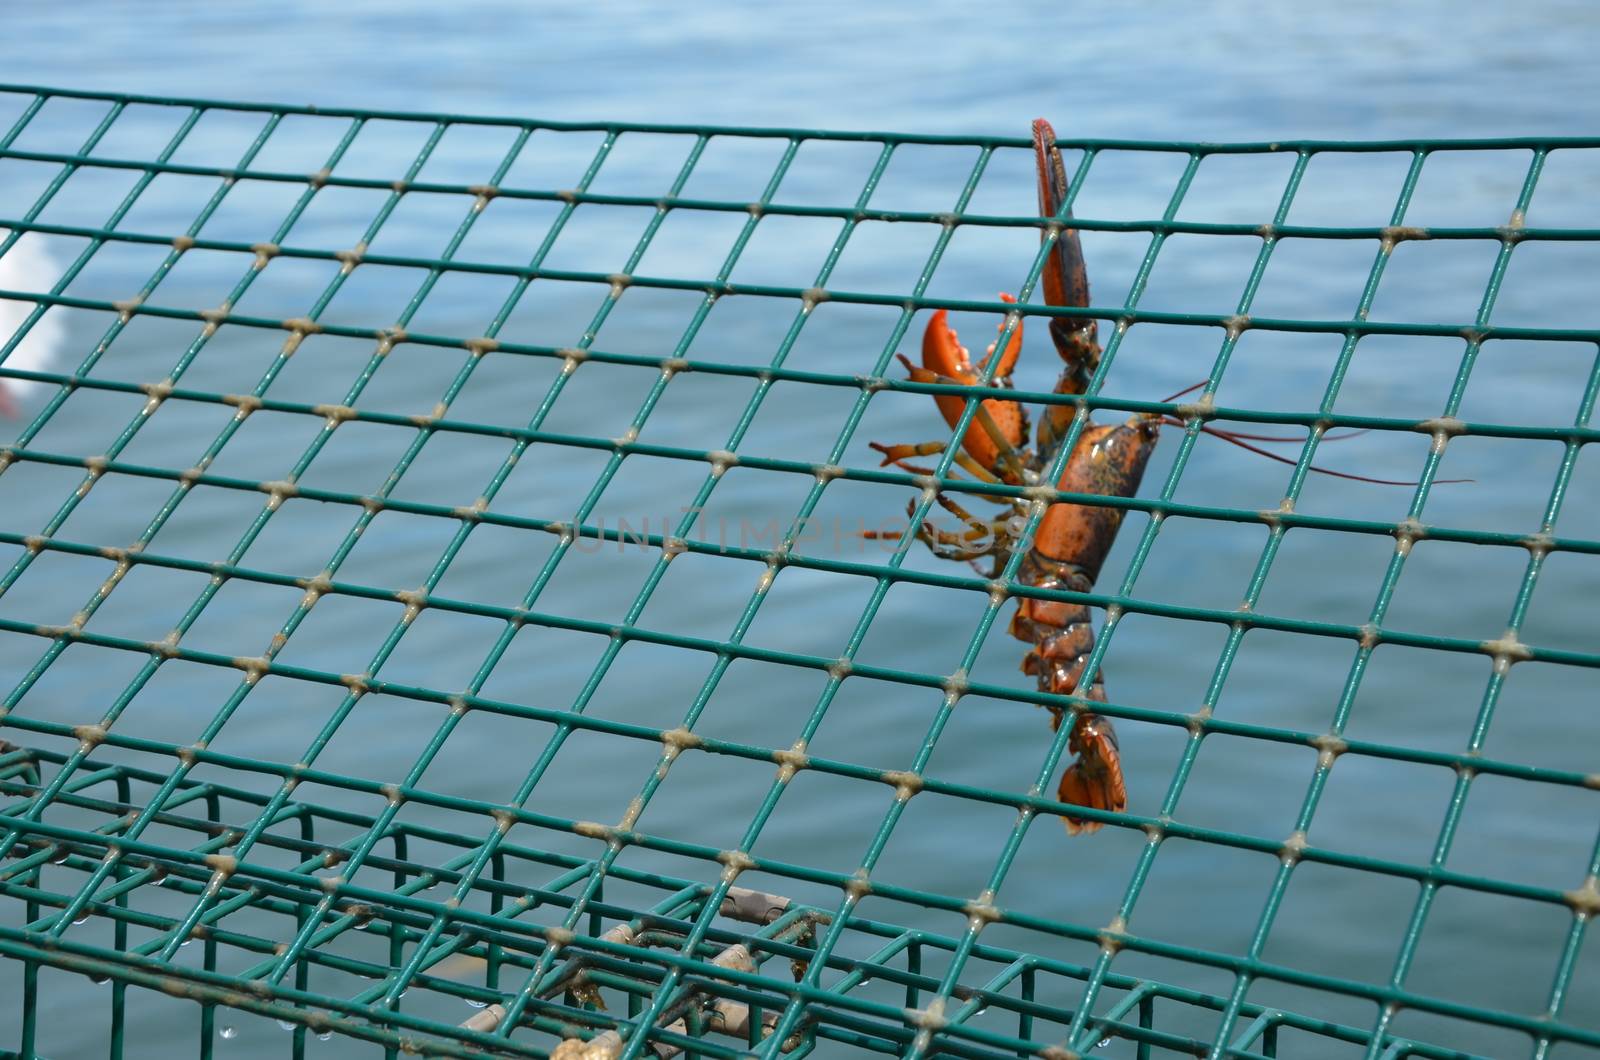 Lobster haging from a trap before being dropped back into the sea for being to small.